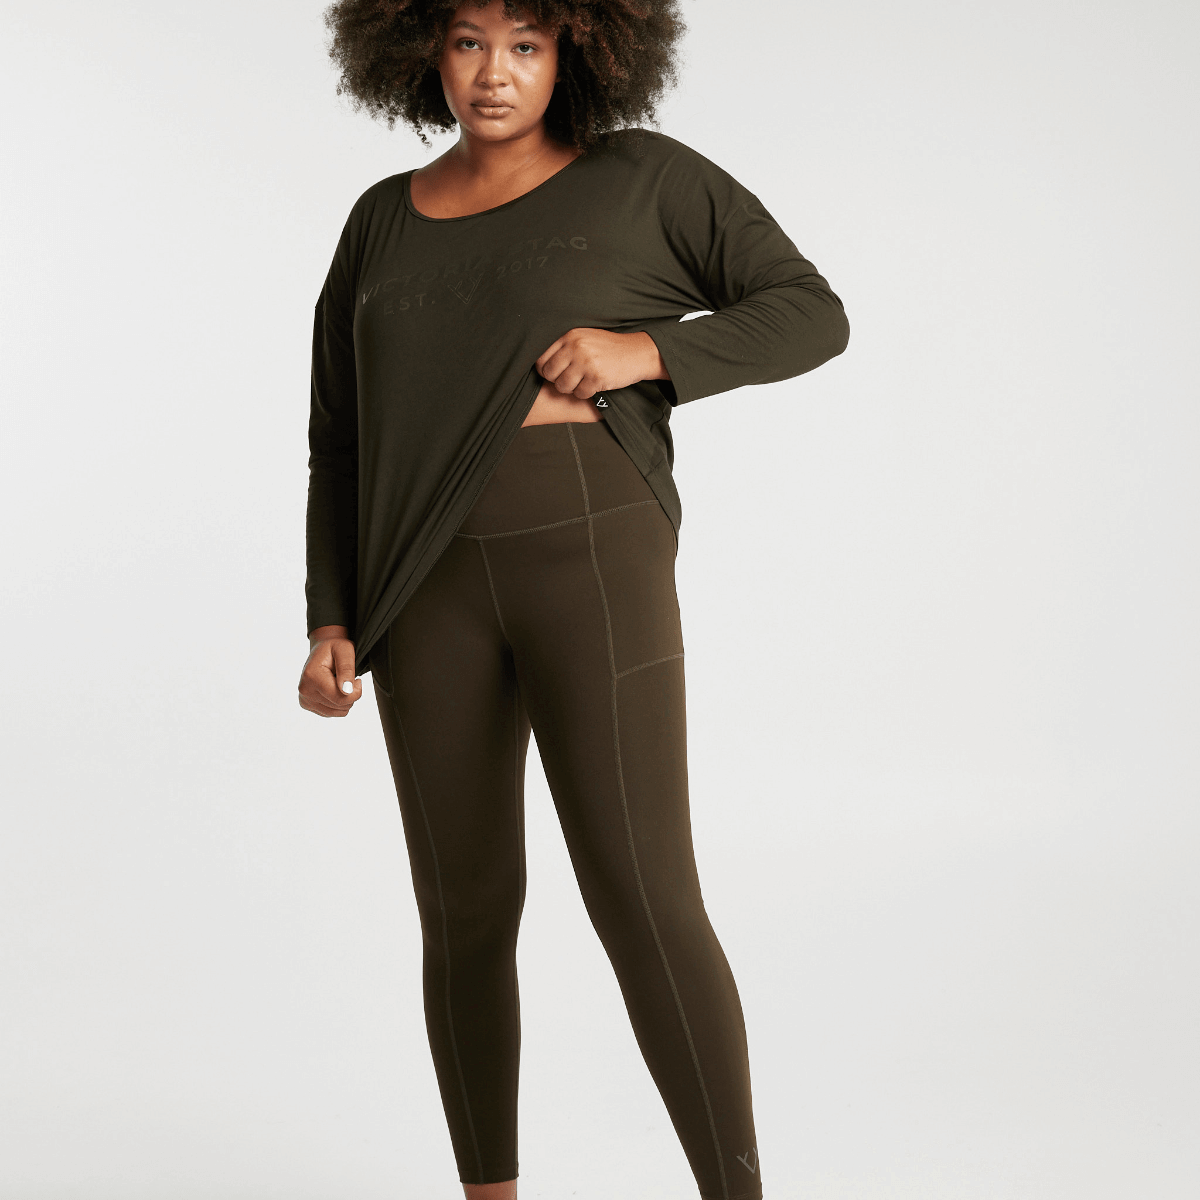 Victoria Stag's Core  Full Length Tights in Khaki